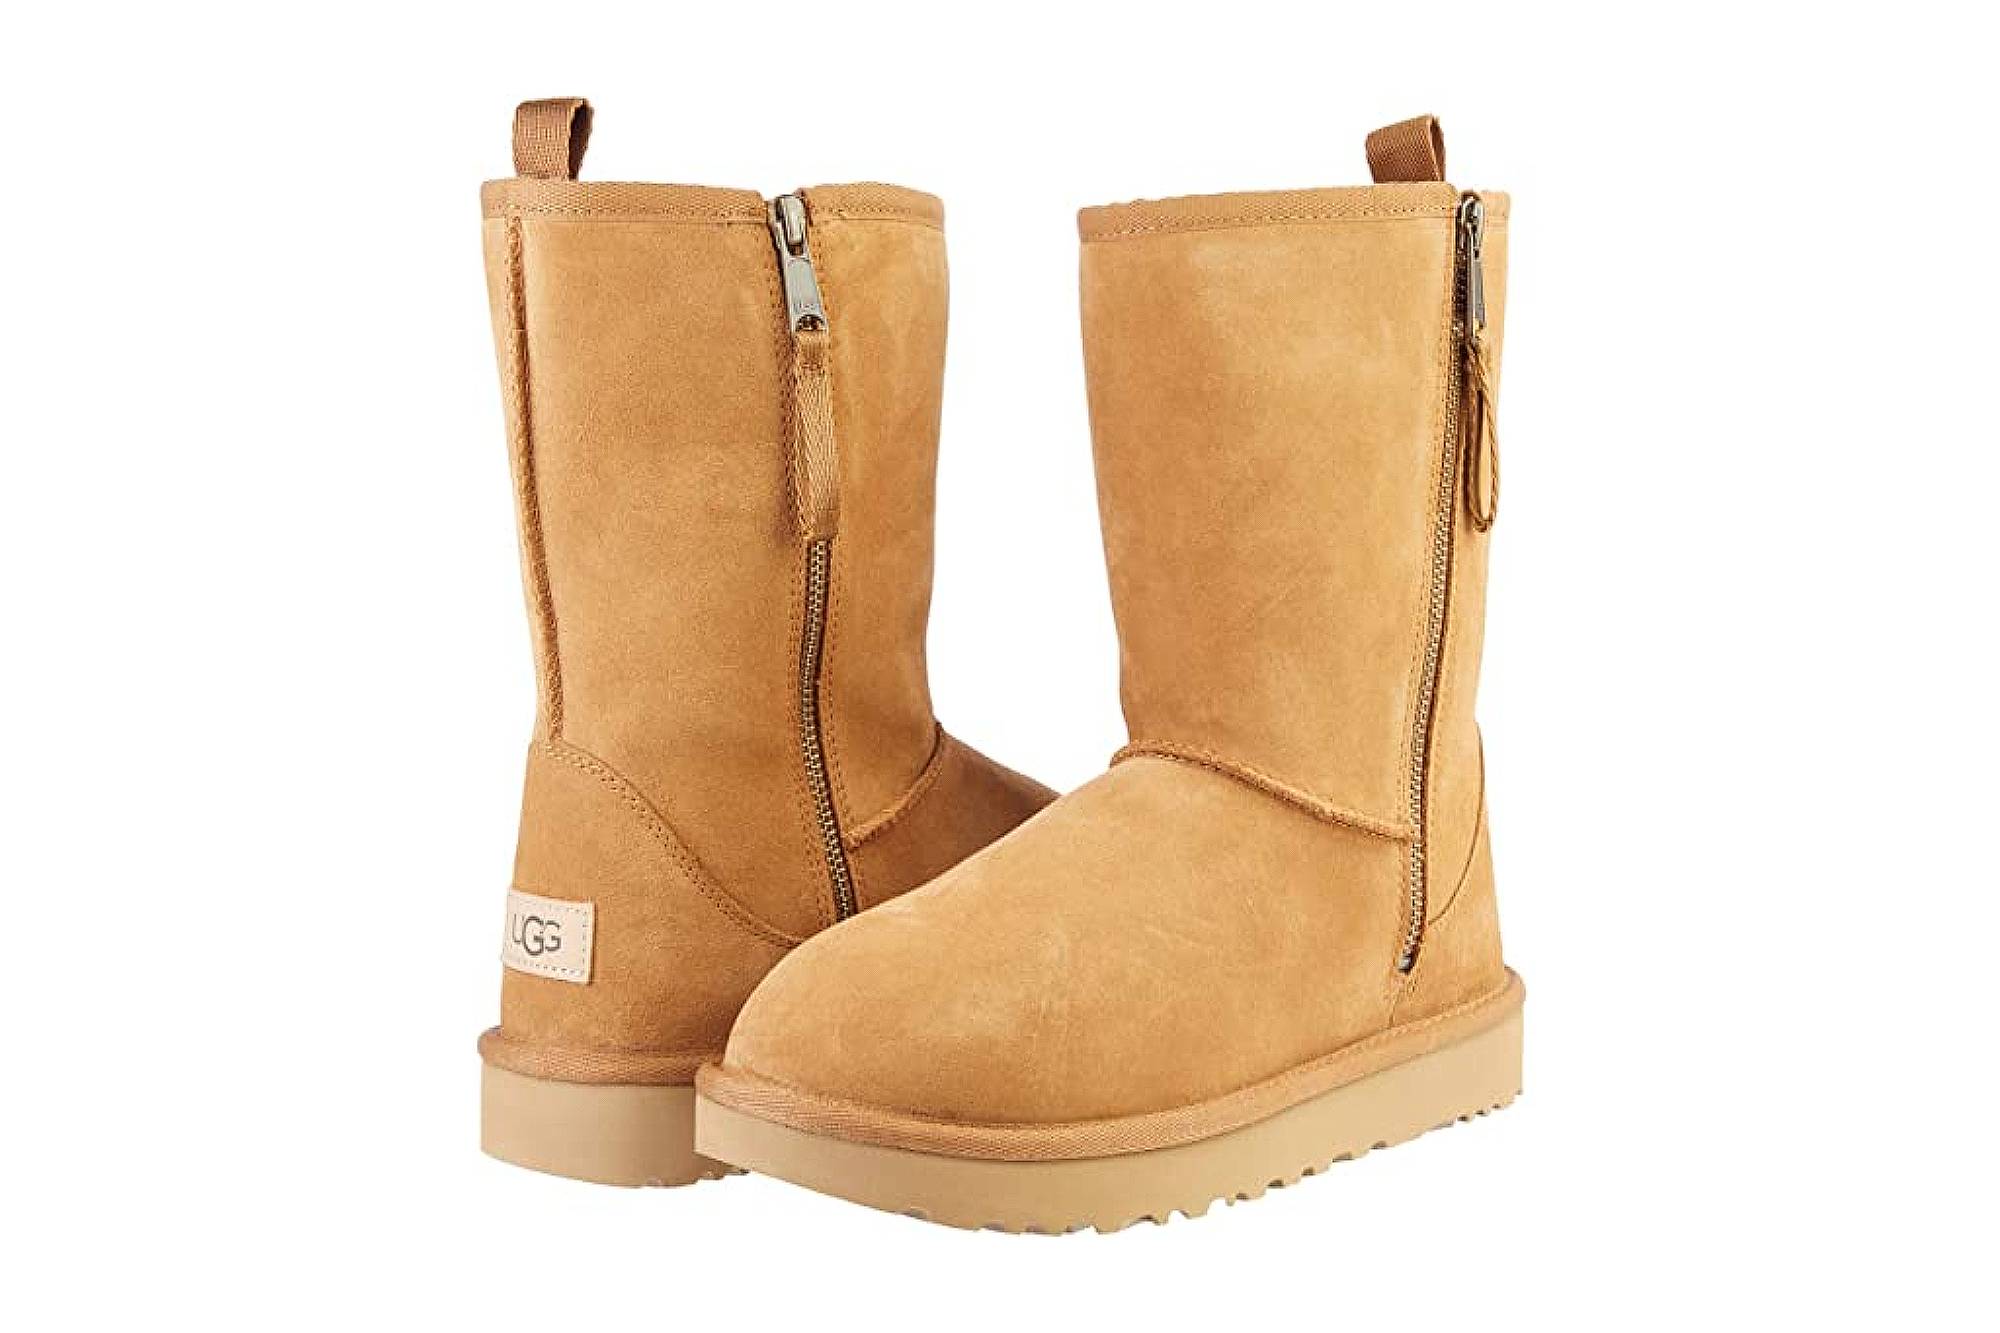 Zappos-Exclusive Winter Boot Collection